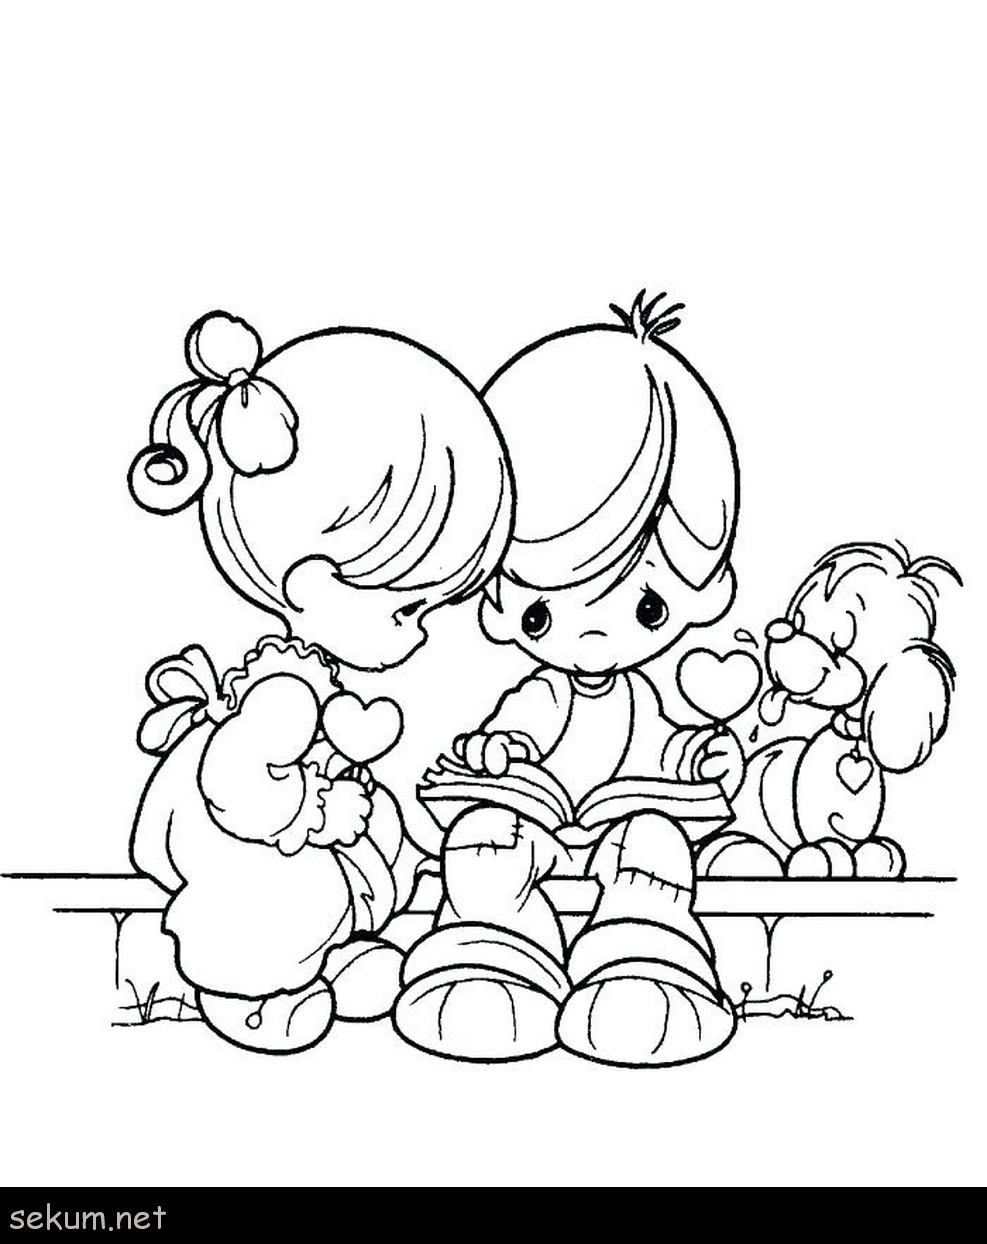 Precious Moments Letters Coloring Pages Precious Moments Ba Coloring Pages Precious Moments Ba Coloring